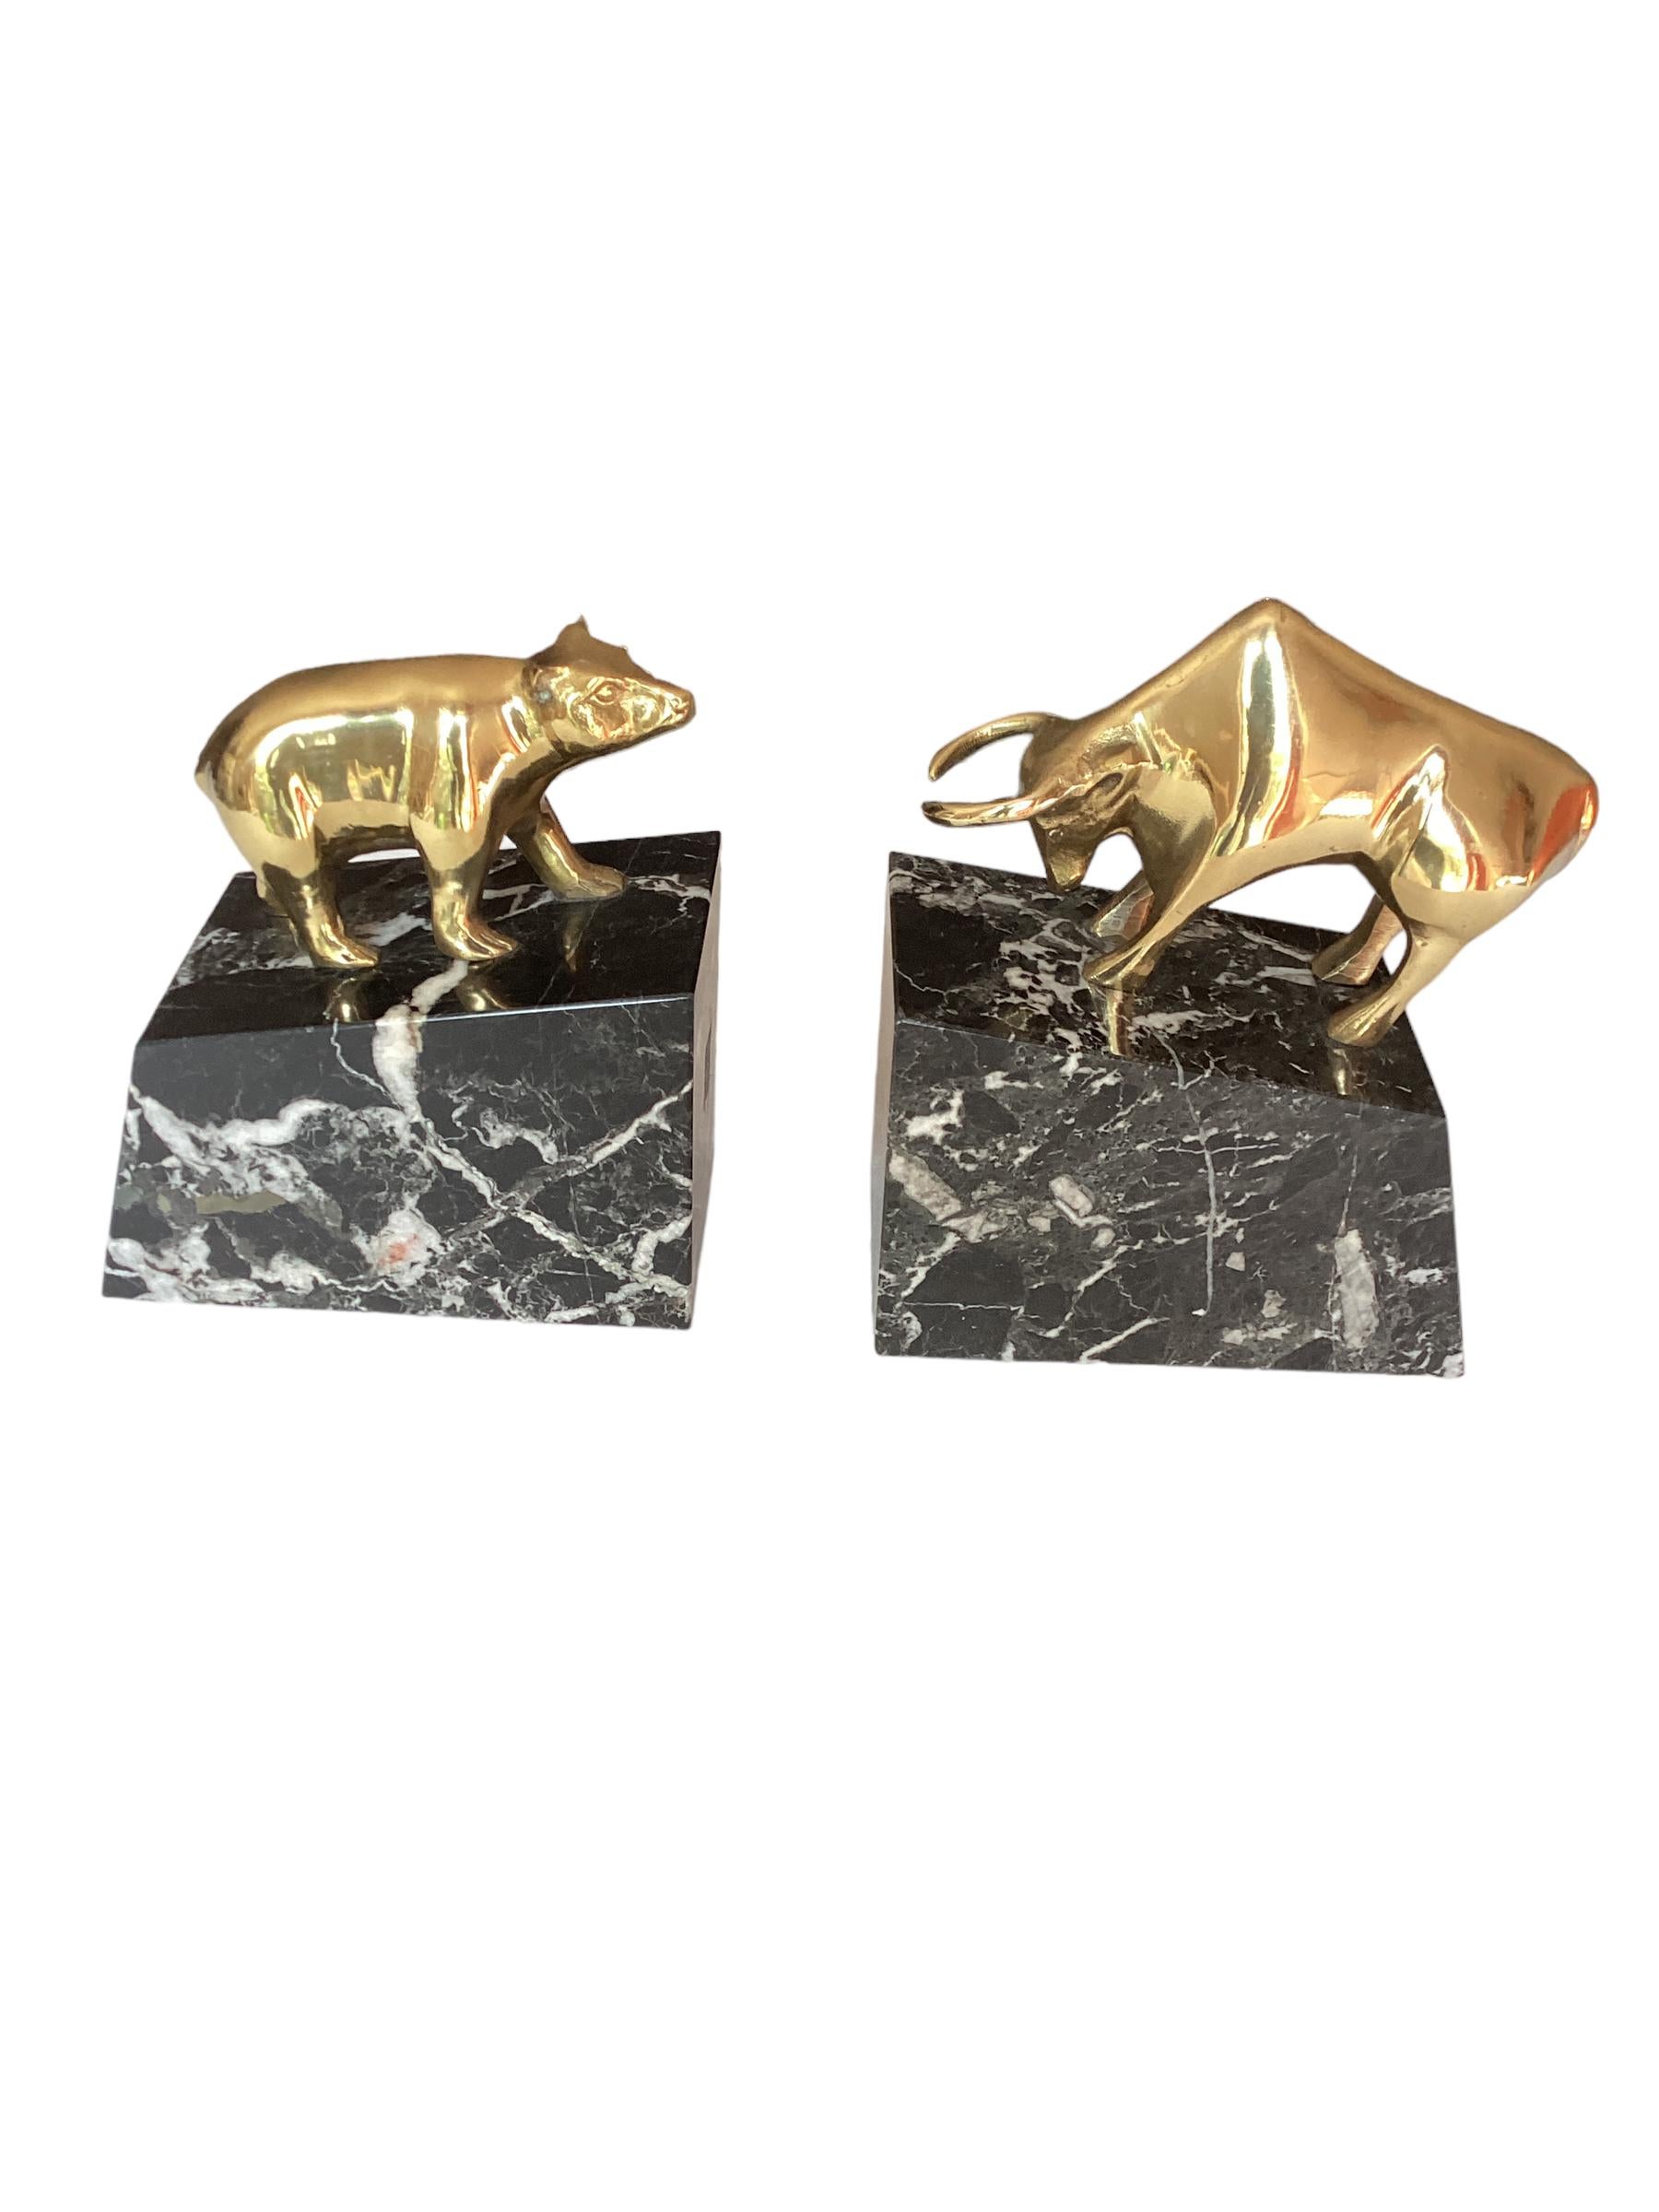 Vintage Brass and Marble Bear and Bull Bookends 1